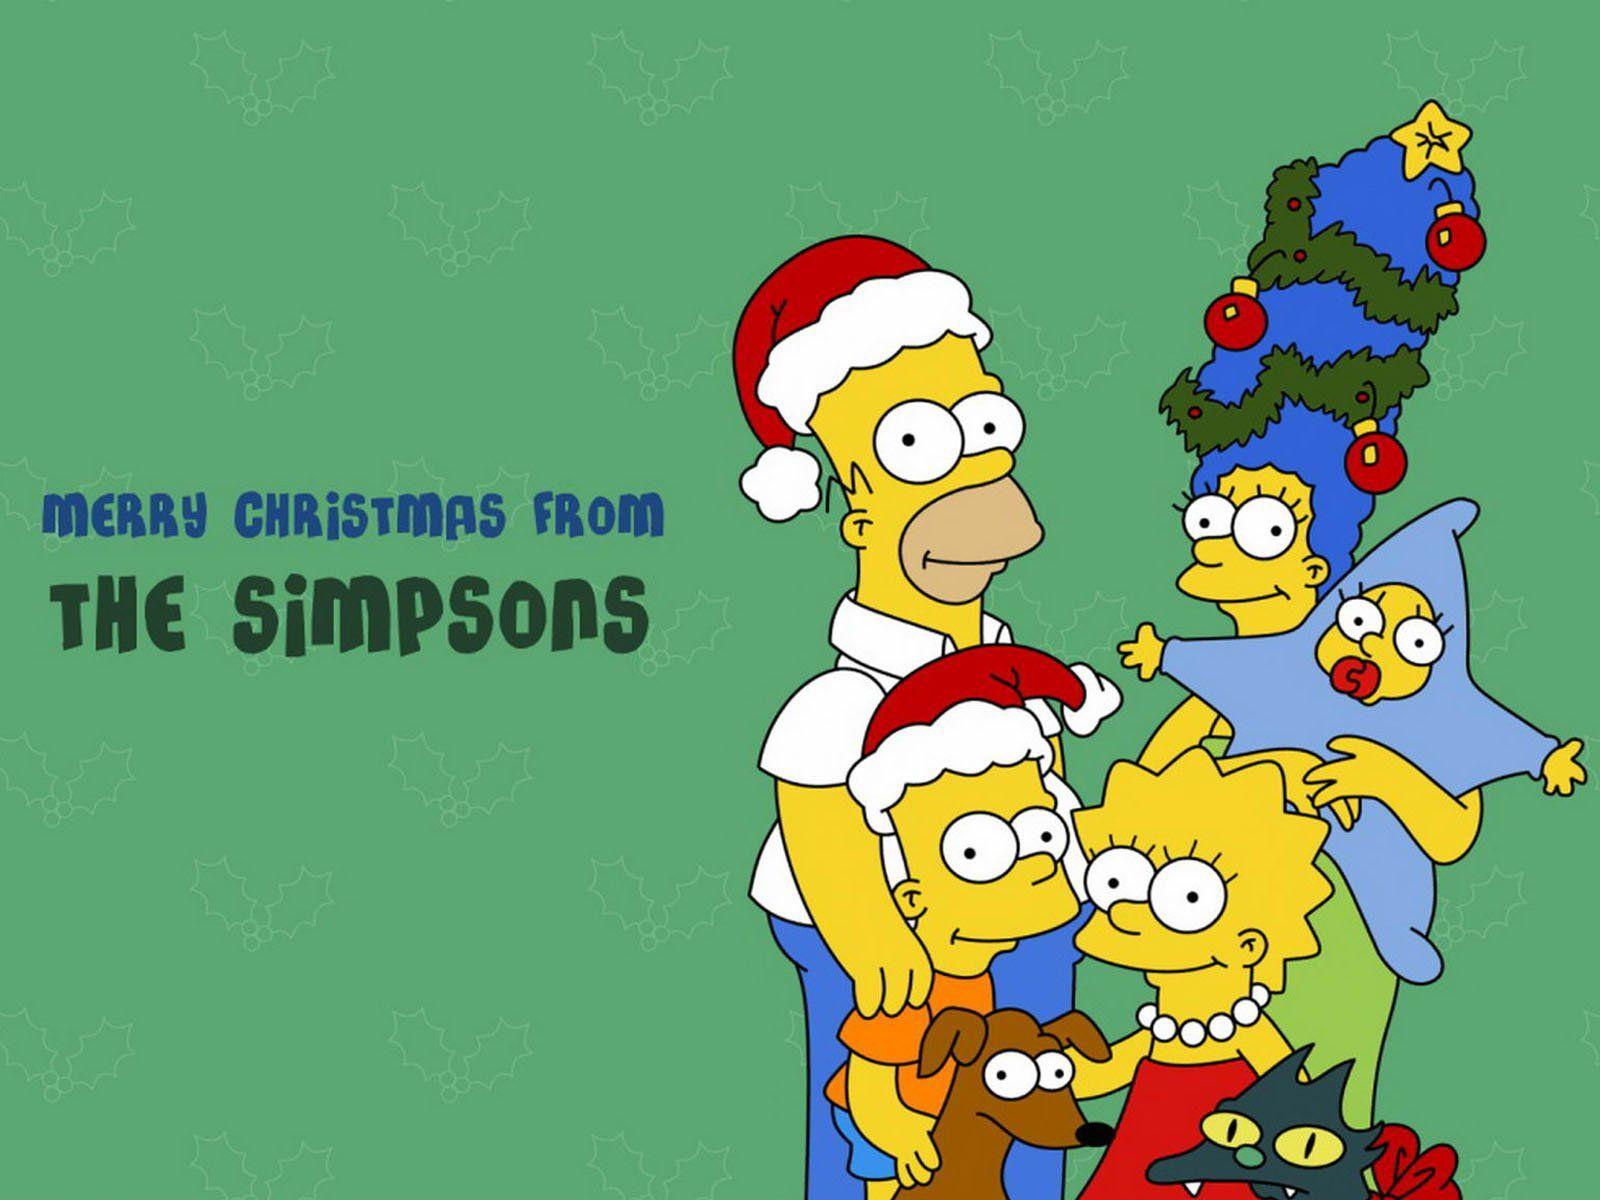 Merry Christmas from The Simpsons Wallpaper. The simpsons, Christmas wallpaper, Christmas cartoons